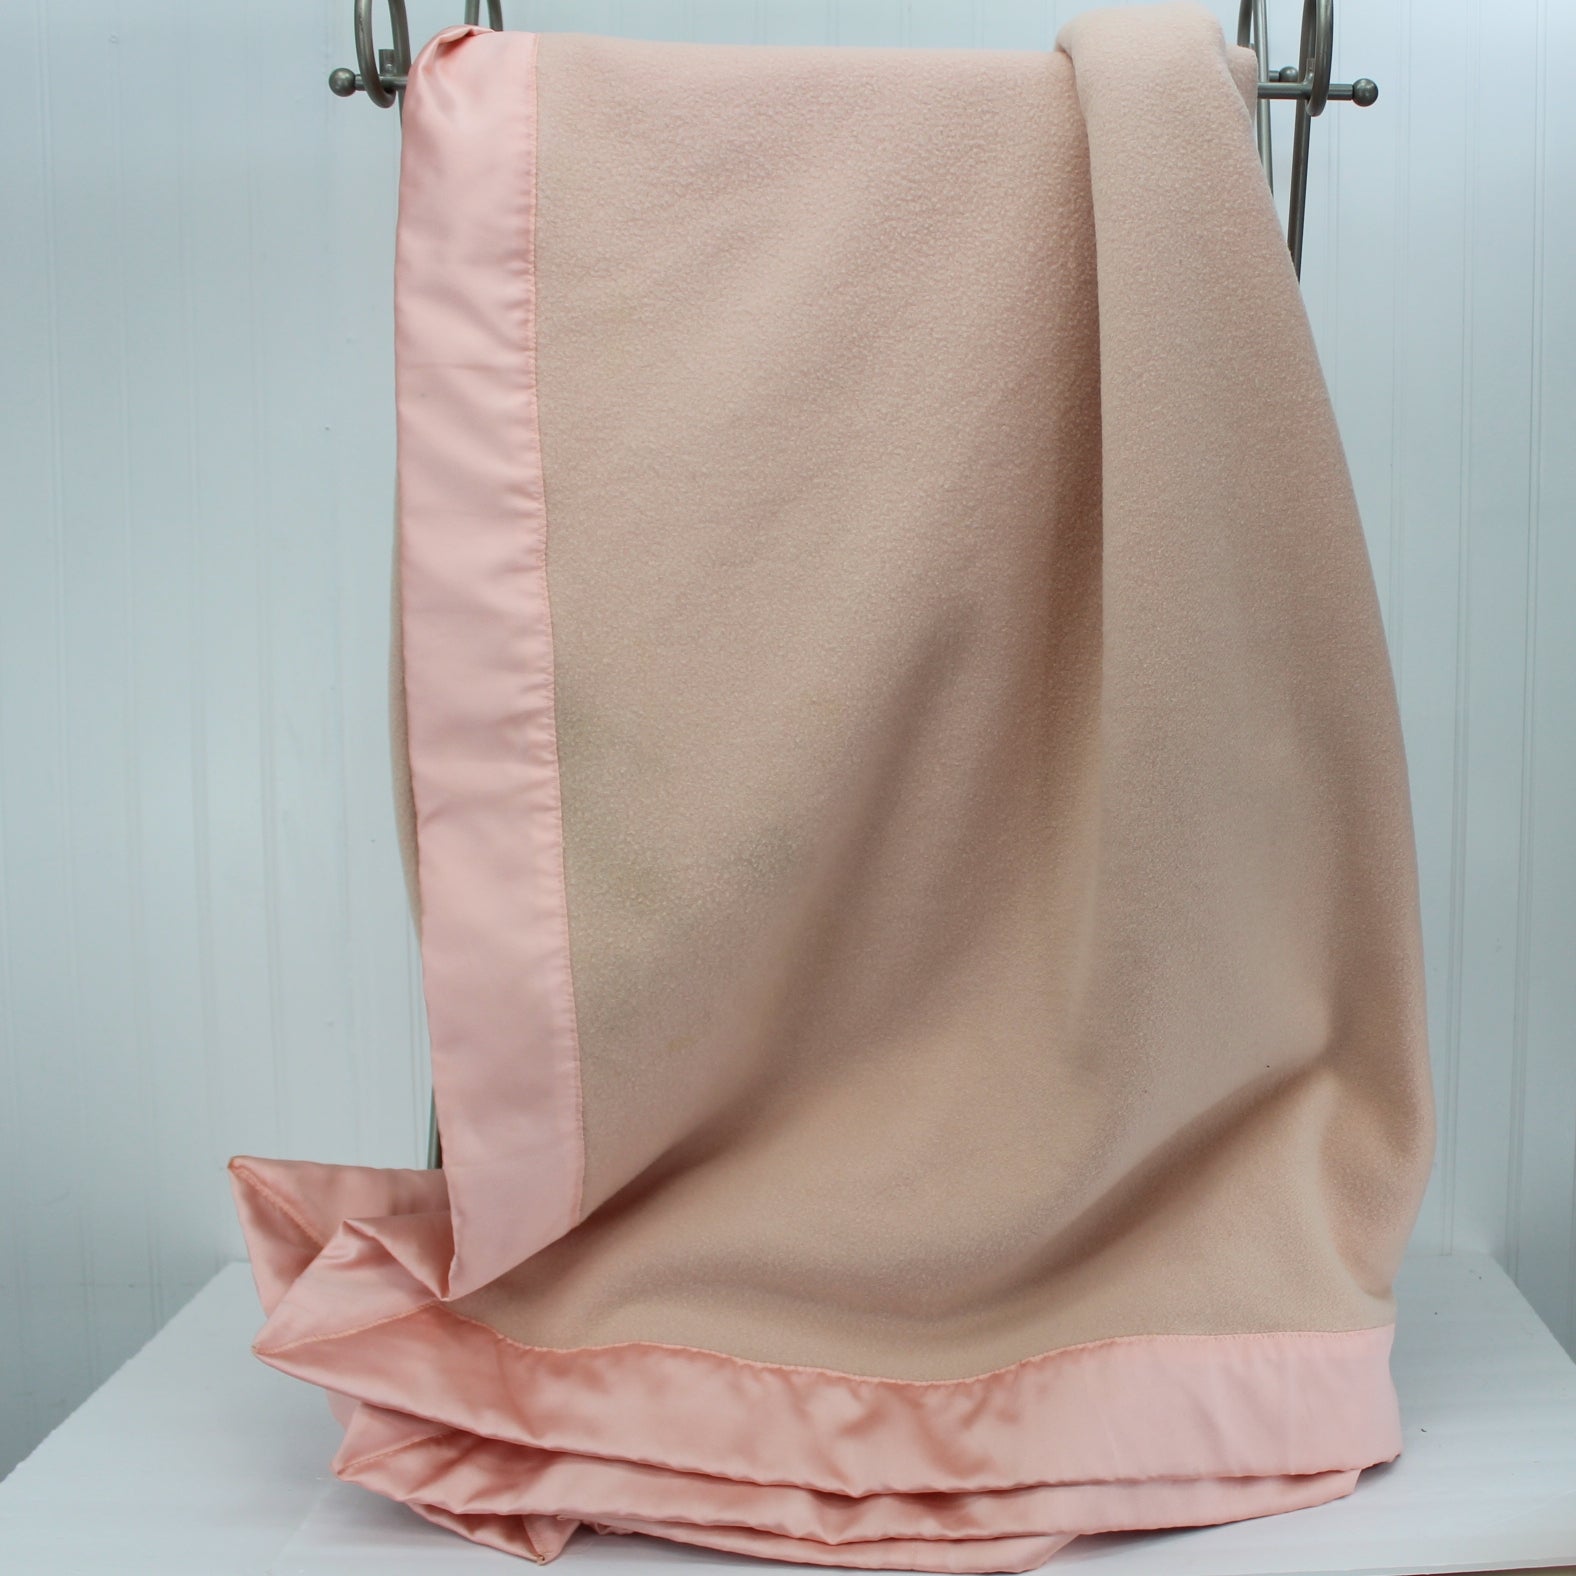 St Marys Ohio Wool Blanket Pale Pink Matching Binding All sides 98" X 82"  hevy almost 6 lbs before packing